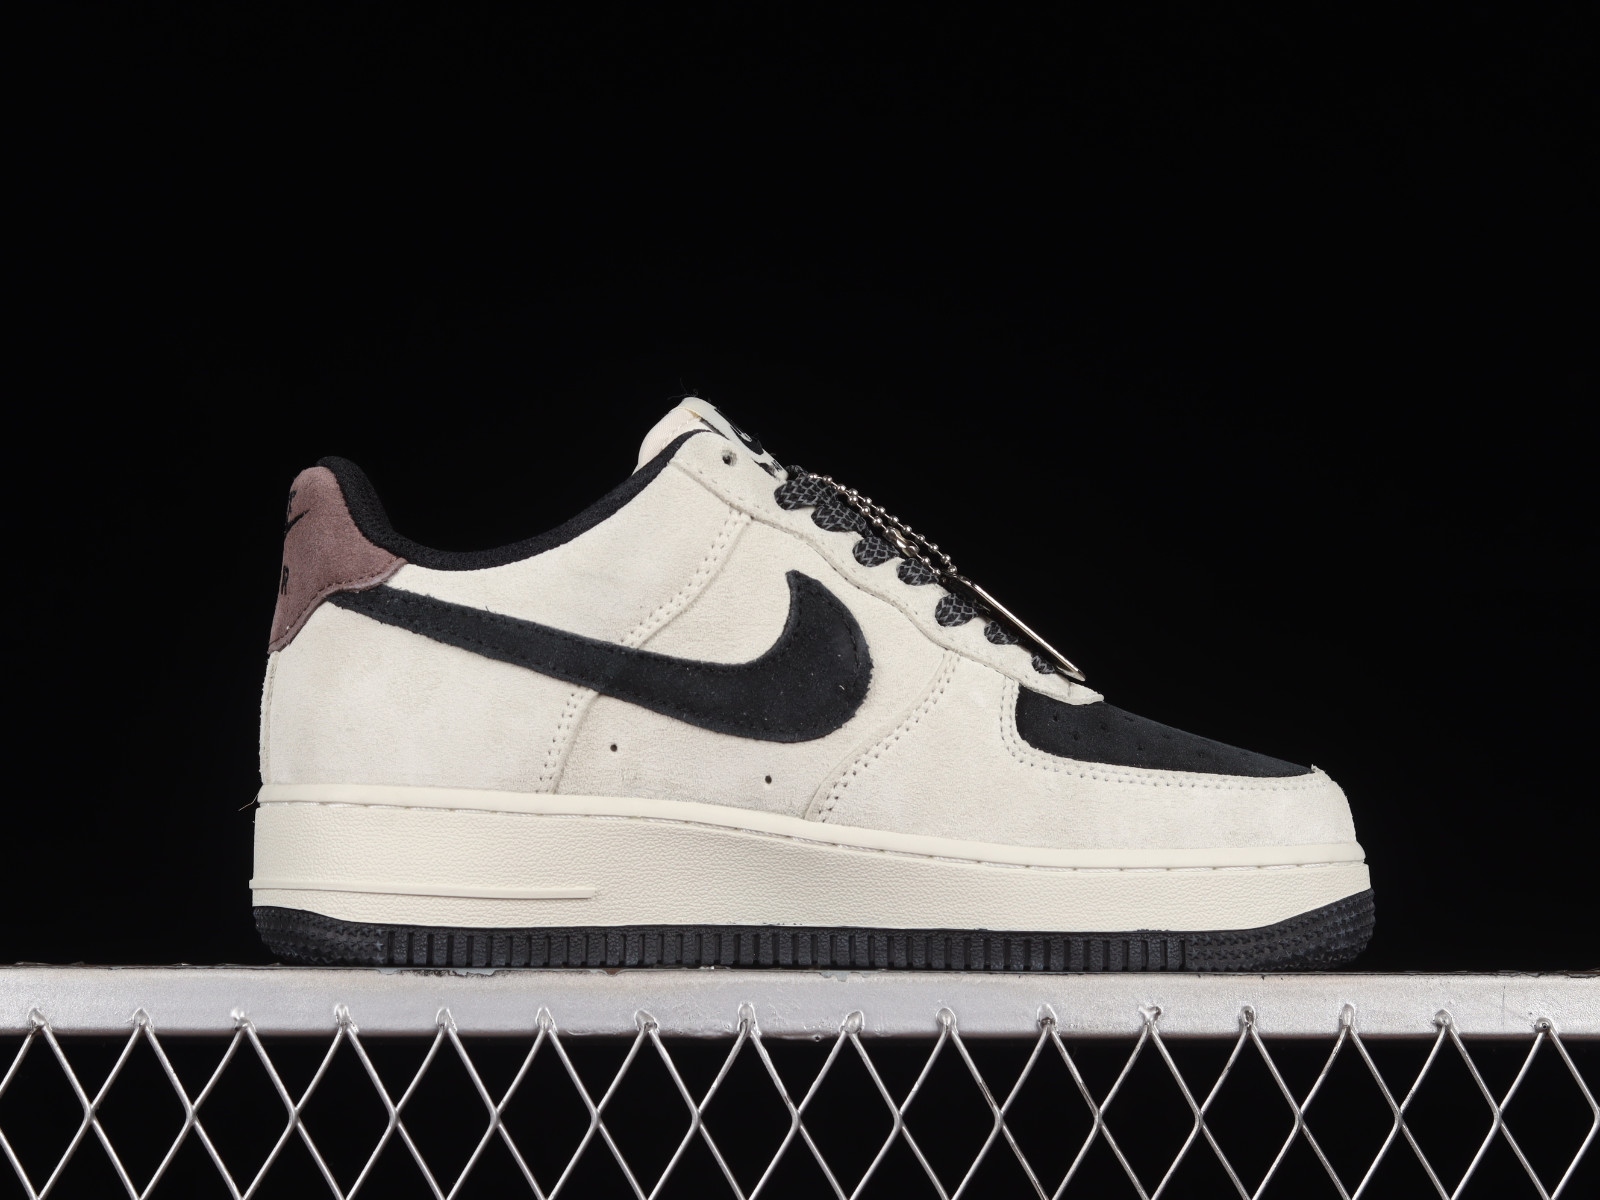 Nike Force 1 07 Low AE86 Suede Black Brown BS9055 nike shox gravity women gold shoes size 11 - GmarShops -